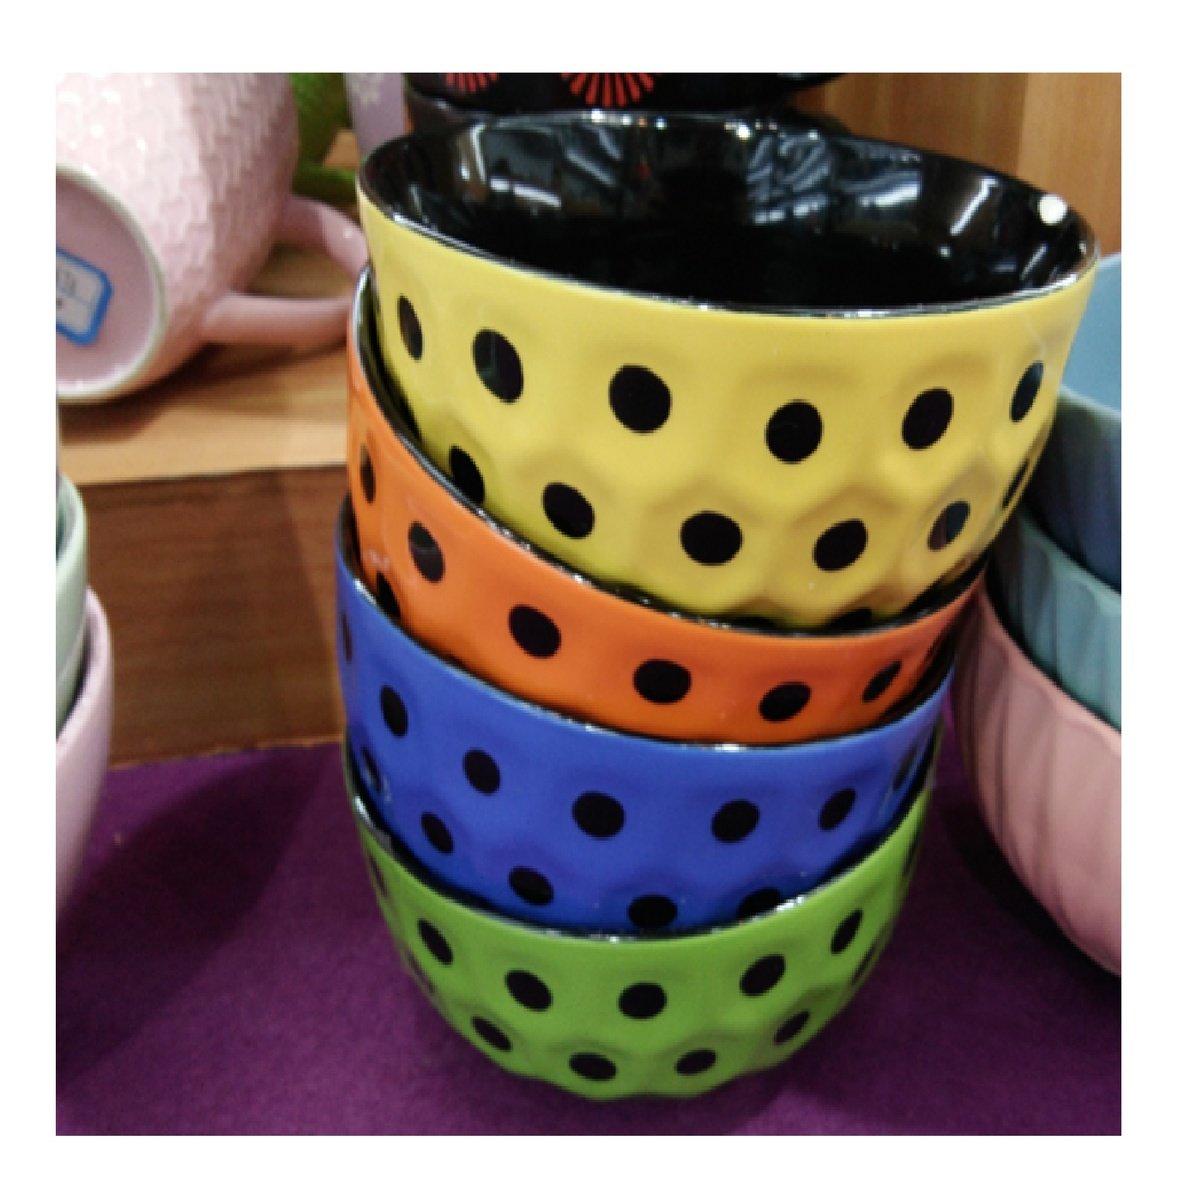 Home Hand Print Bowl 5.5in VM1615 Assorted Colors